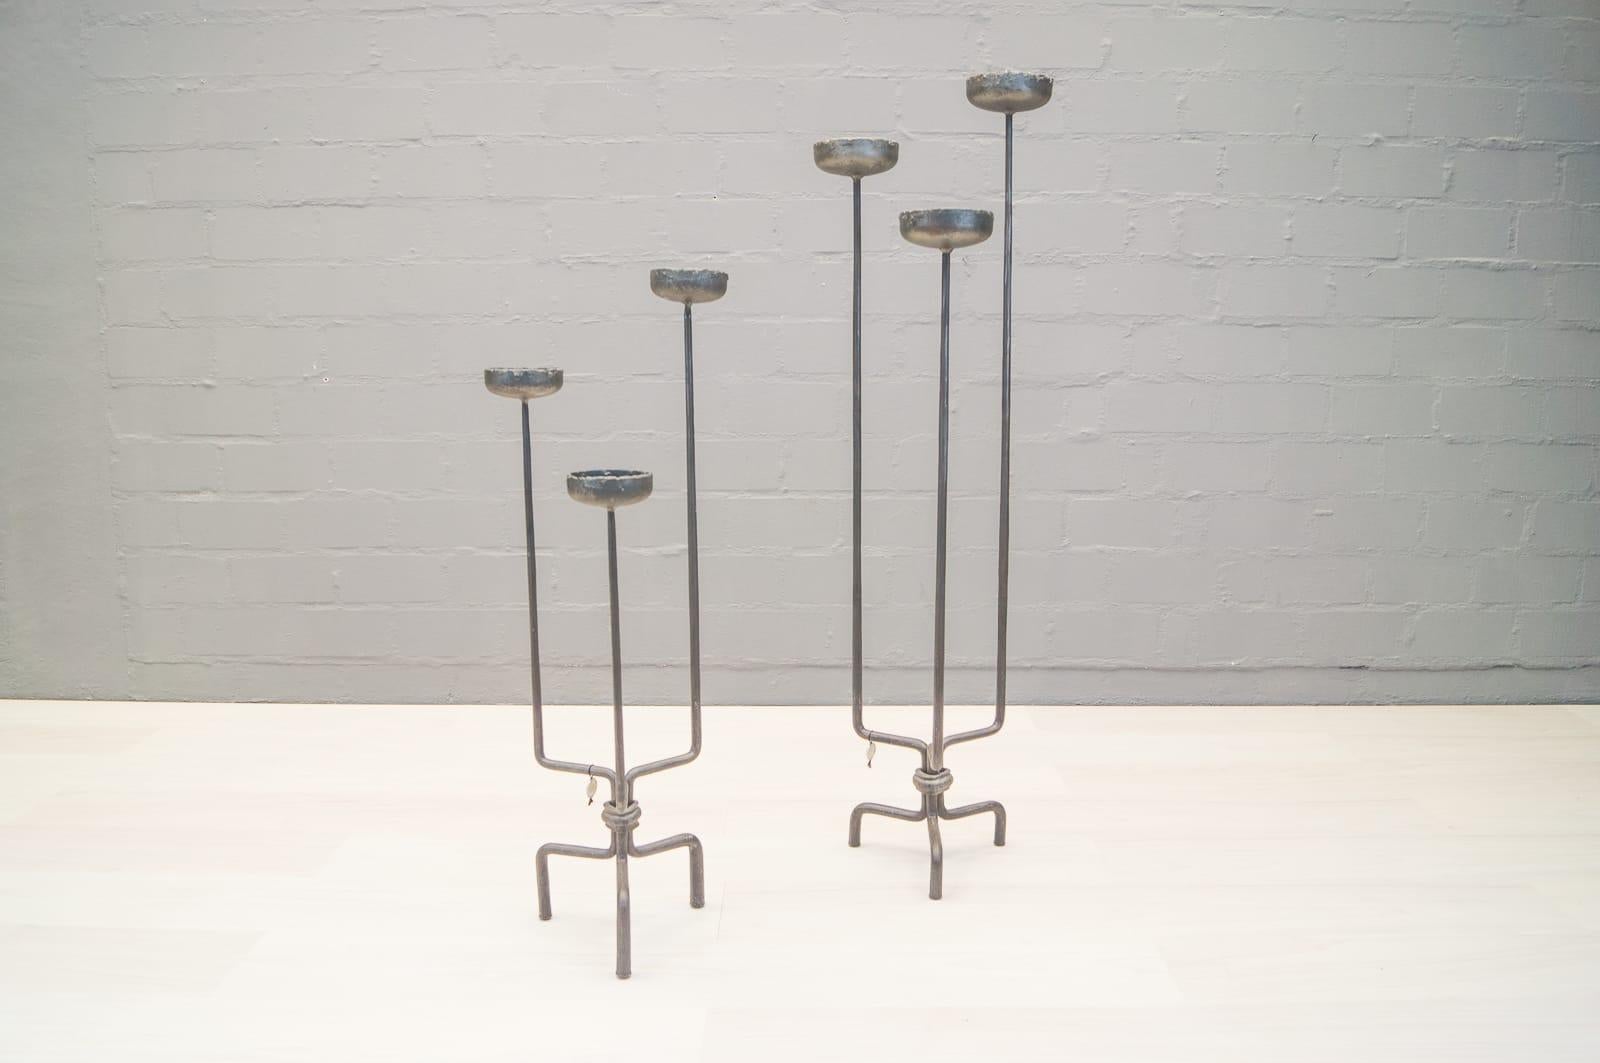 Wrought candleholders in iron by Manfred Bredohl for Bredohl Design Vulkanschmiede.

These two candleholders measure 94 and 125 cm in height and 34-38 cm in width. Good condition. 

 